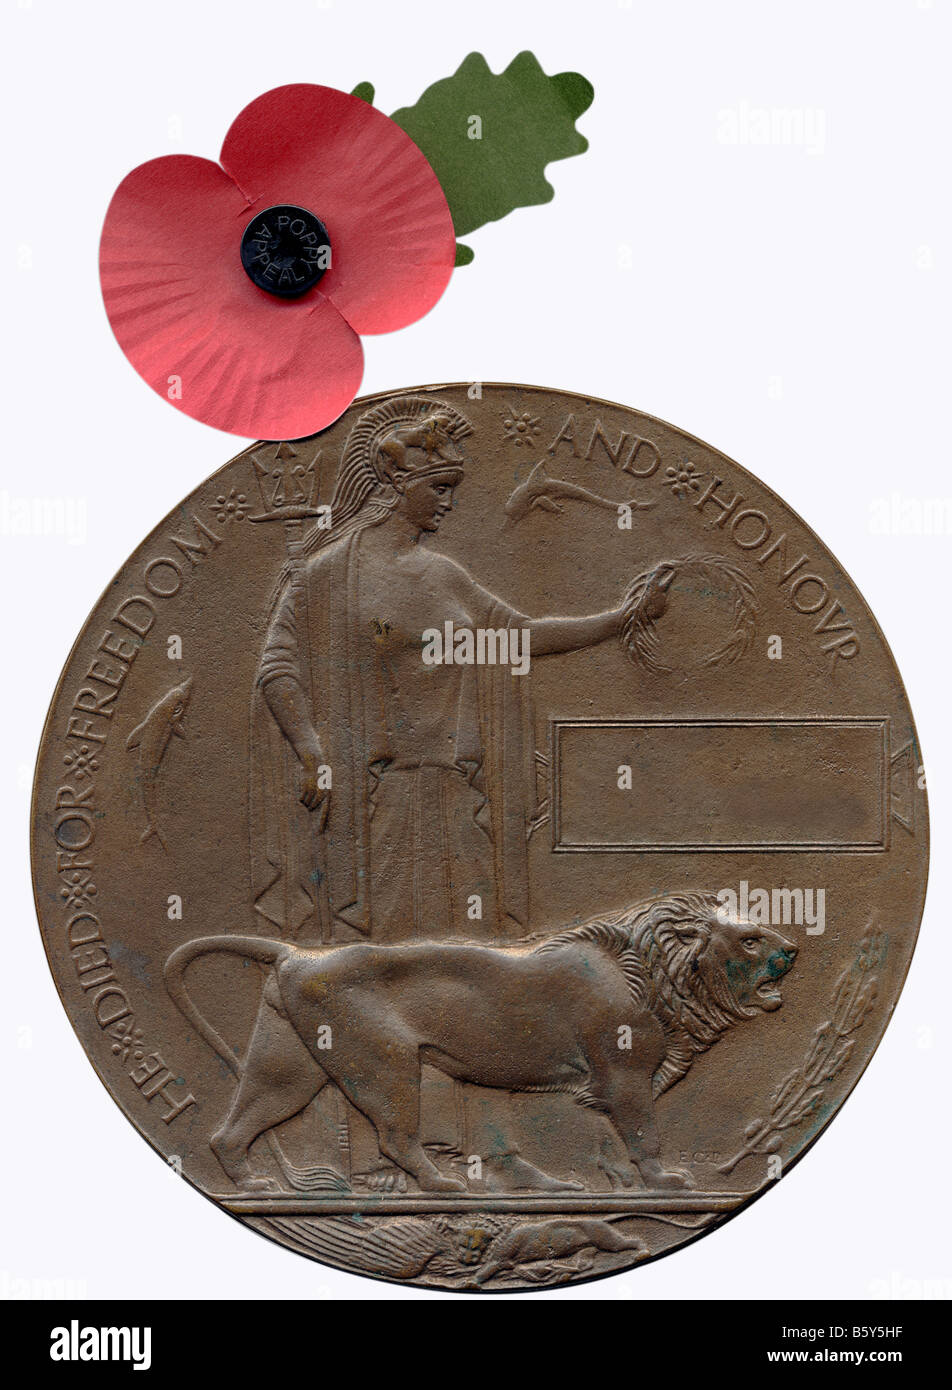 World War 1  memorial plaque with soldier's name removed. Stock Photo